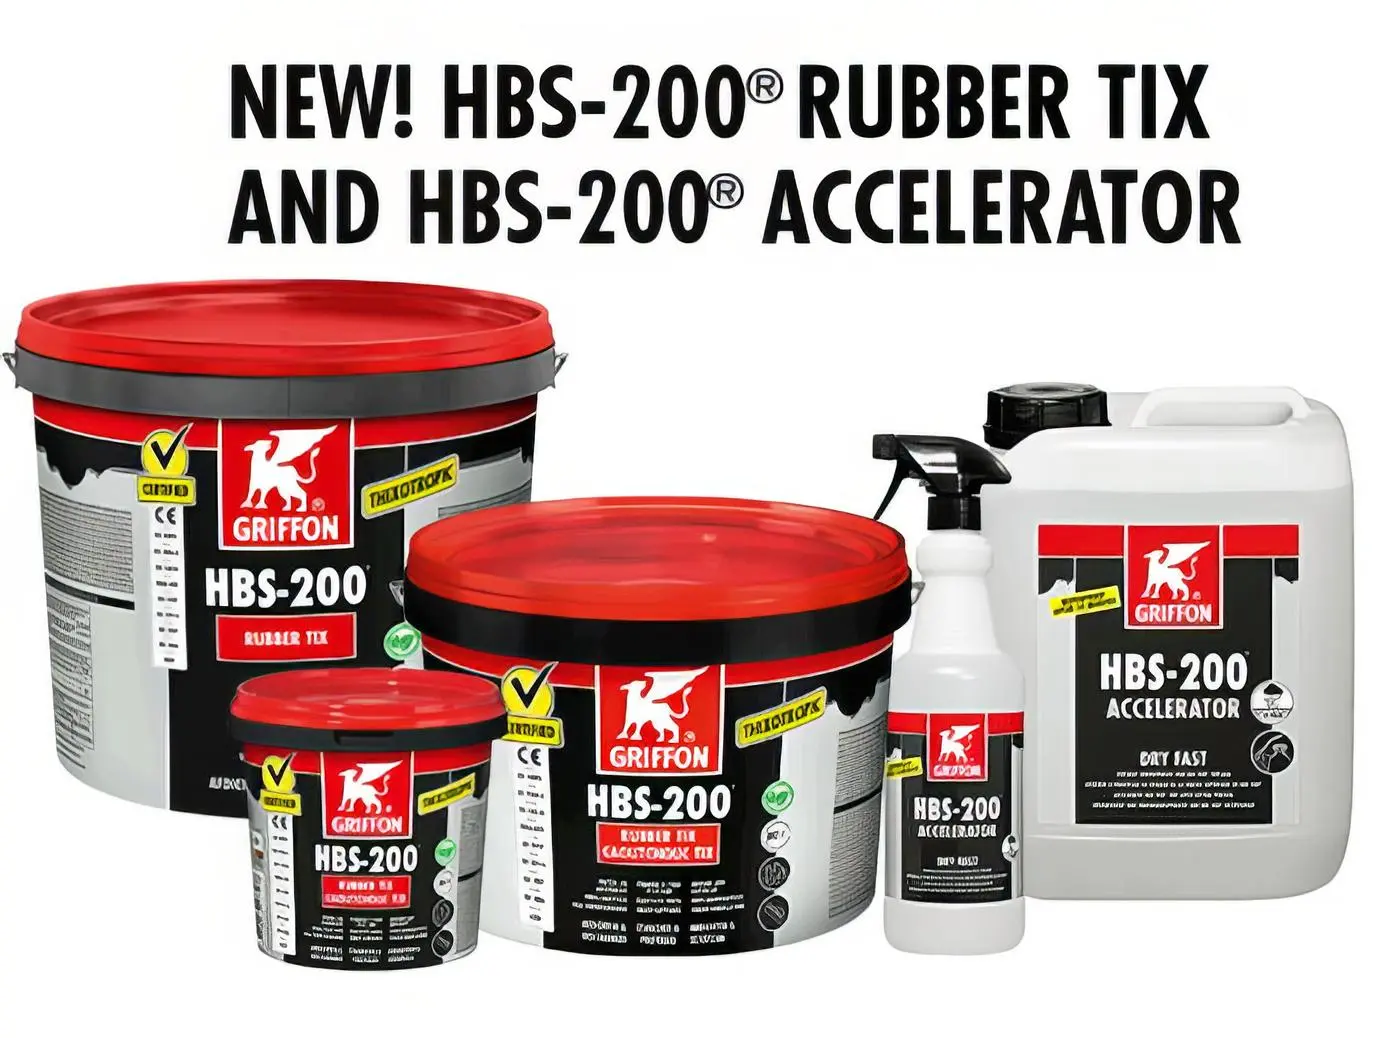 HBS-200 ACCELERATOR AND RUBBER TIX